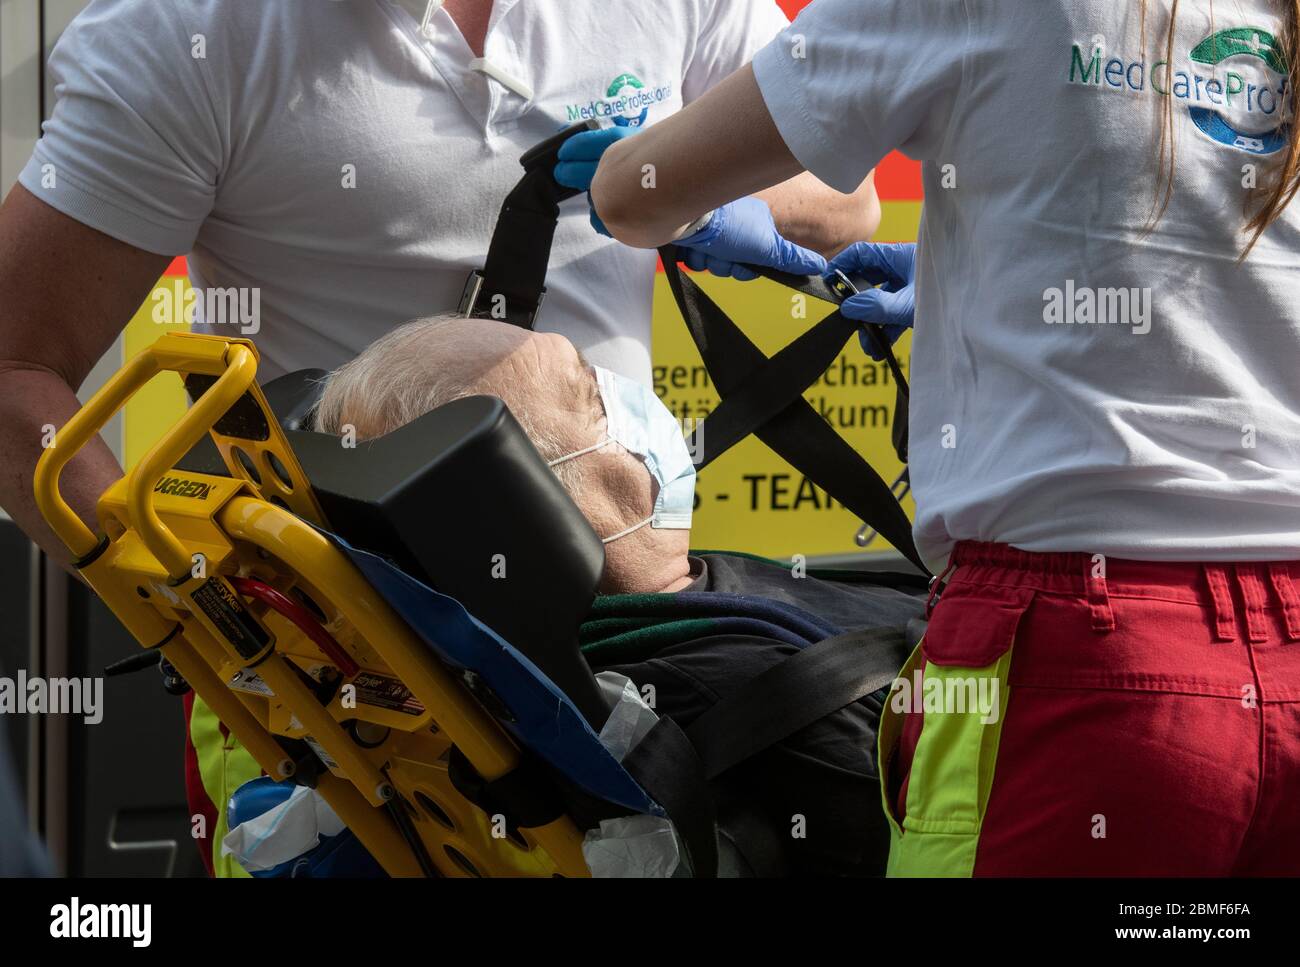 Bochum, Germany. 09th May, 2020. Claudio Facoetti (65, M), corona patient from Bergamo in Italy, is strapped on a stretcher in front of the Catholic University Hospital St. Josef Hospital to be pushed into an ambulance. The recovered patient was then transported to Düsseldorf airport, from where he is taken to his home country. Credit: Bernd Thissen/dpa/Alamy Live News Stock Photo